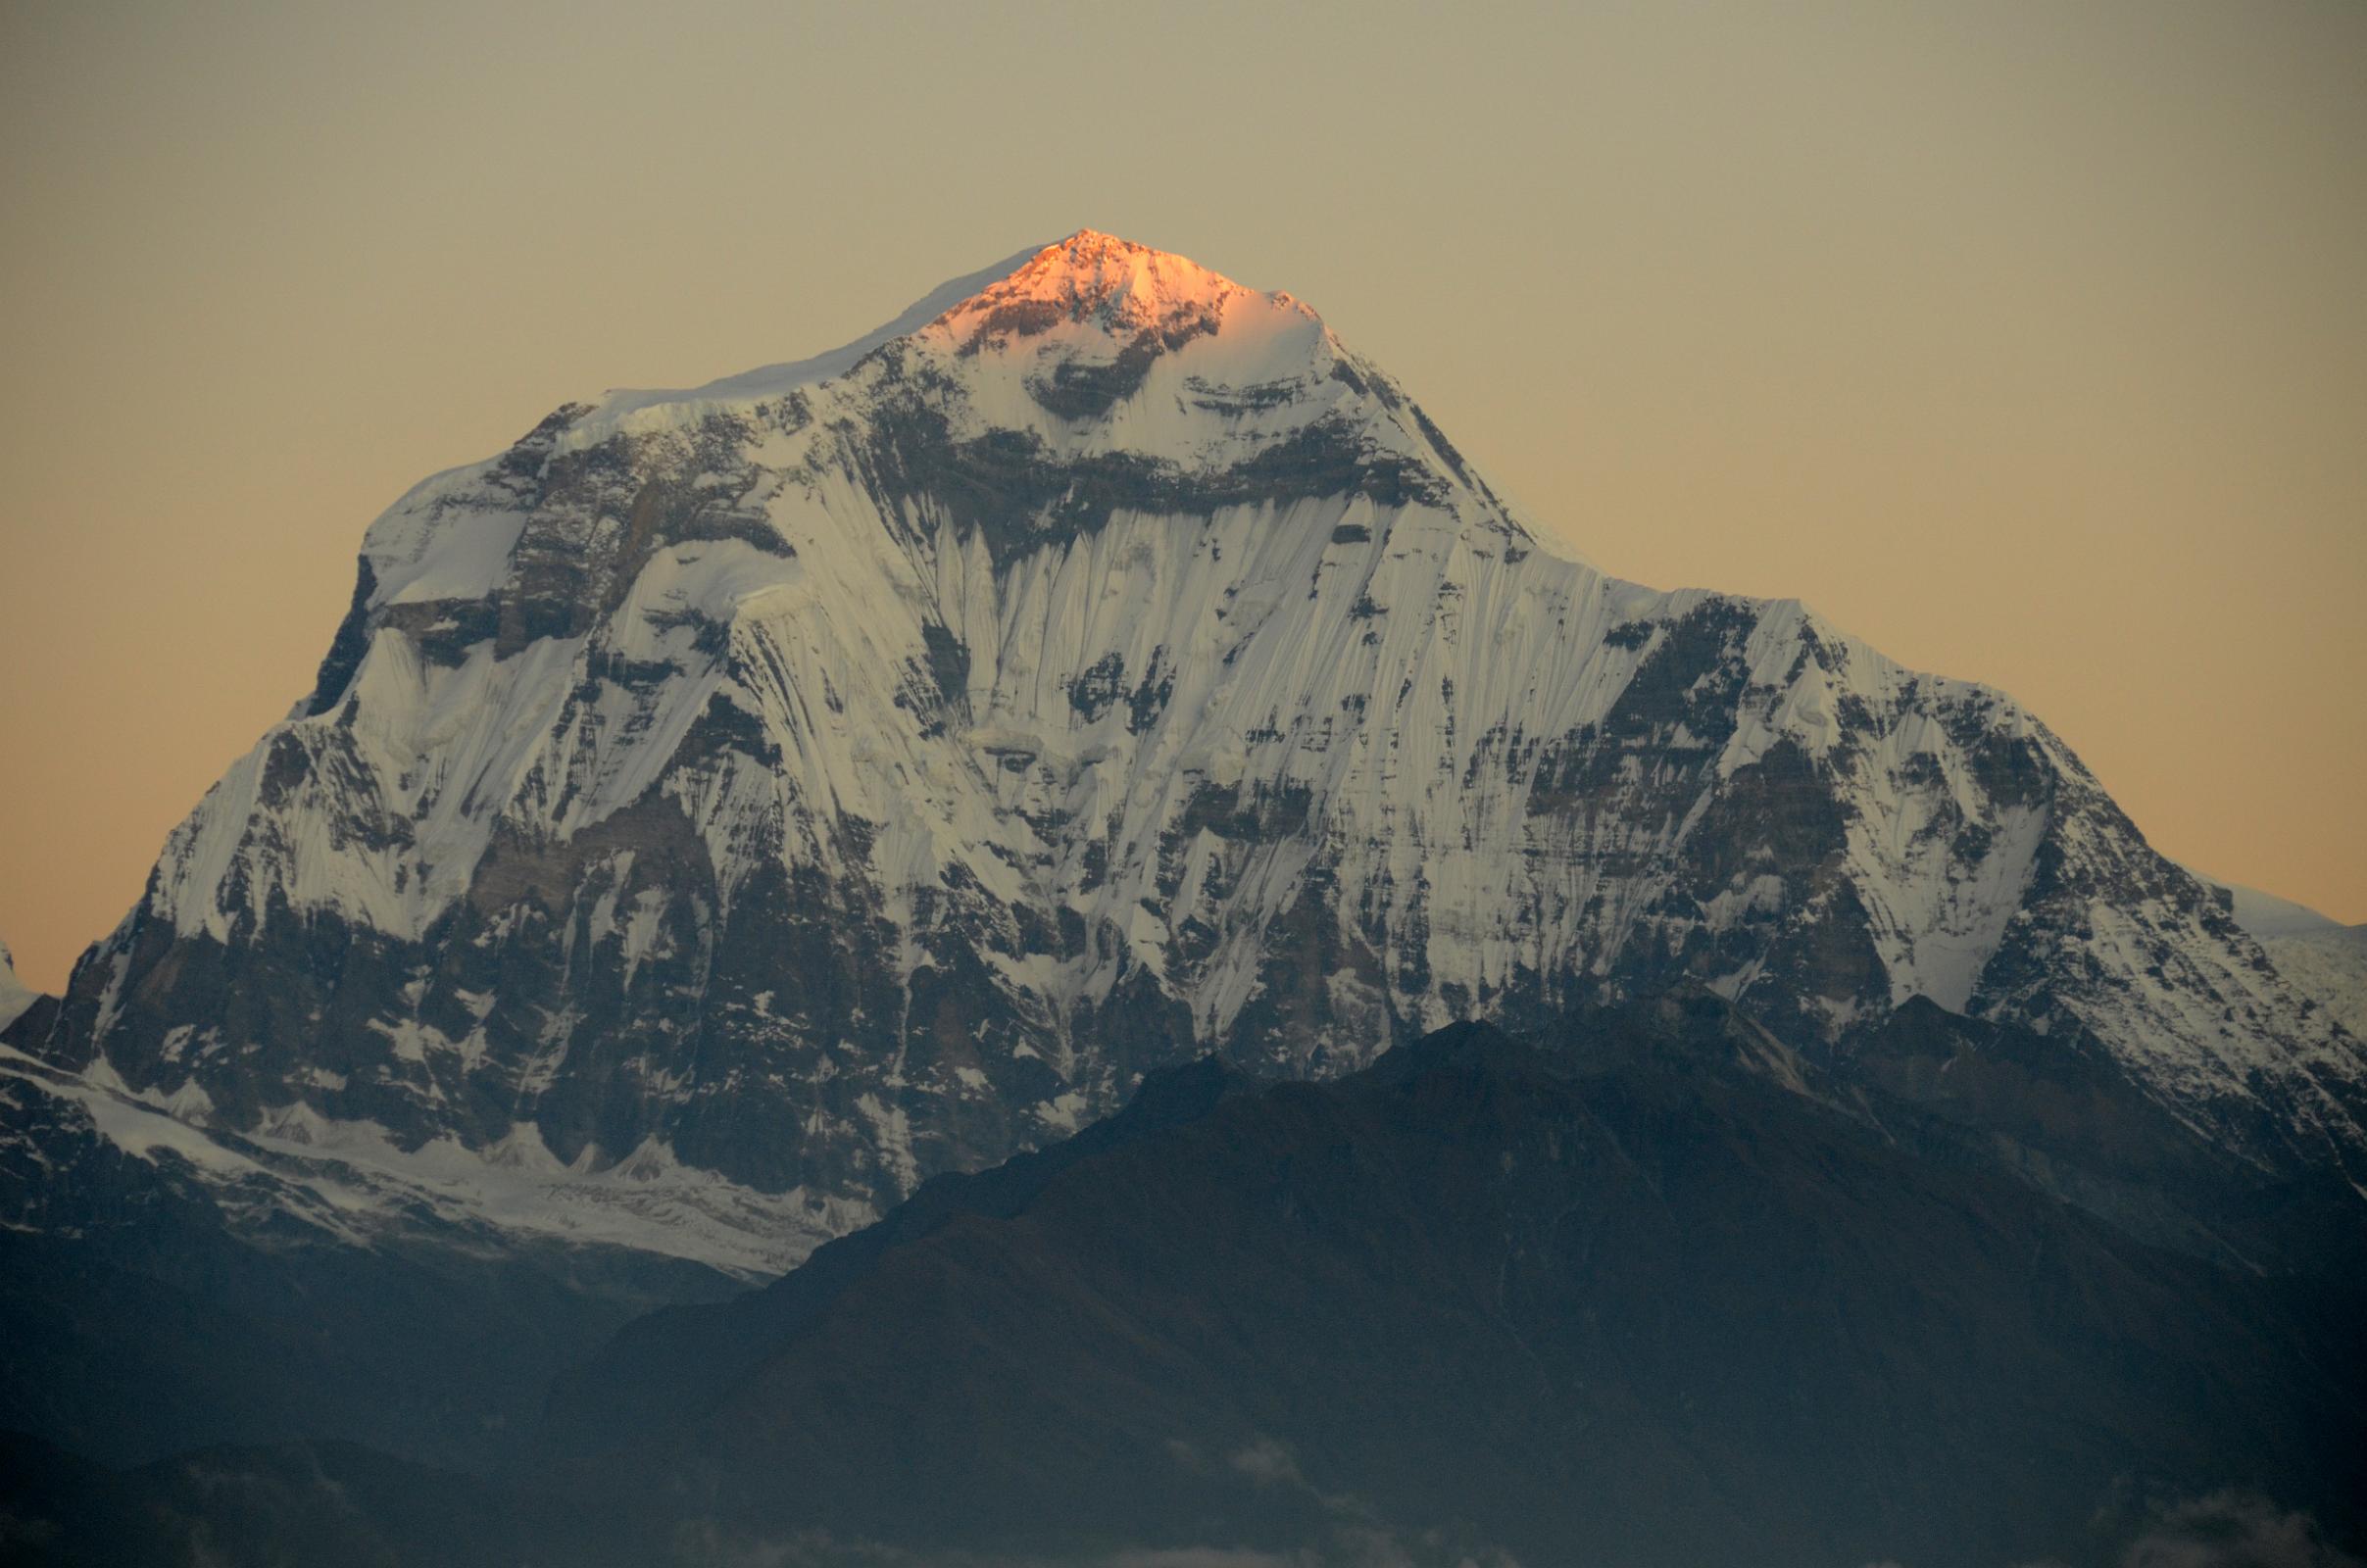 Poon Hill 04 The First Rays Of Sunrise Shine On The Dhaulagiri Summit 